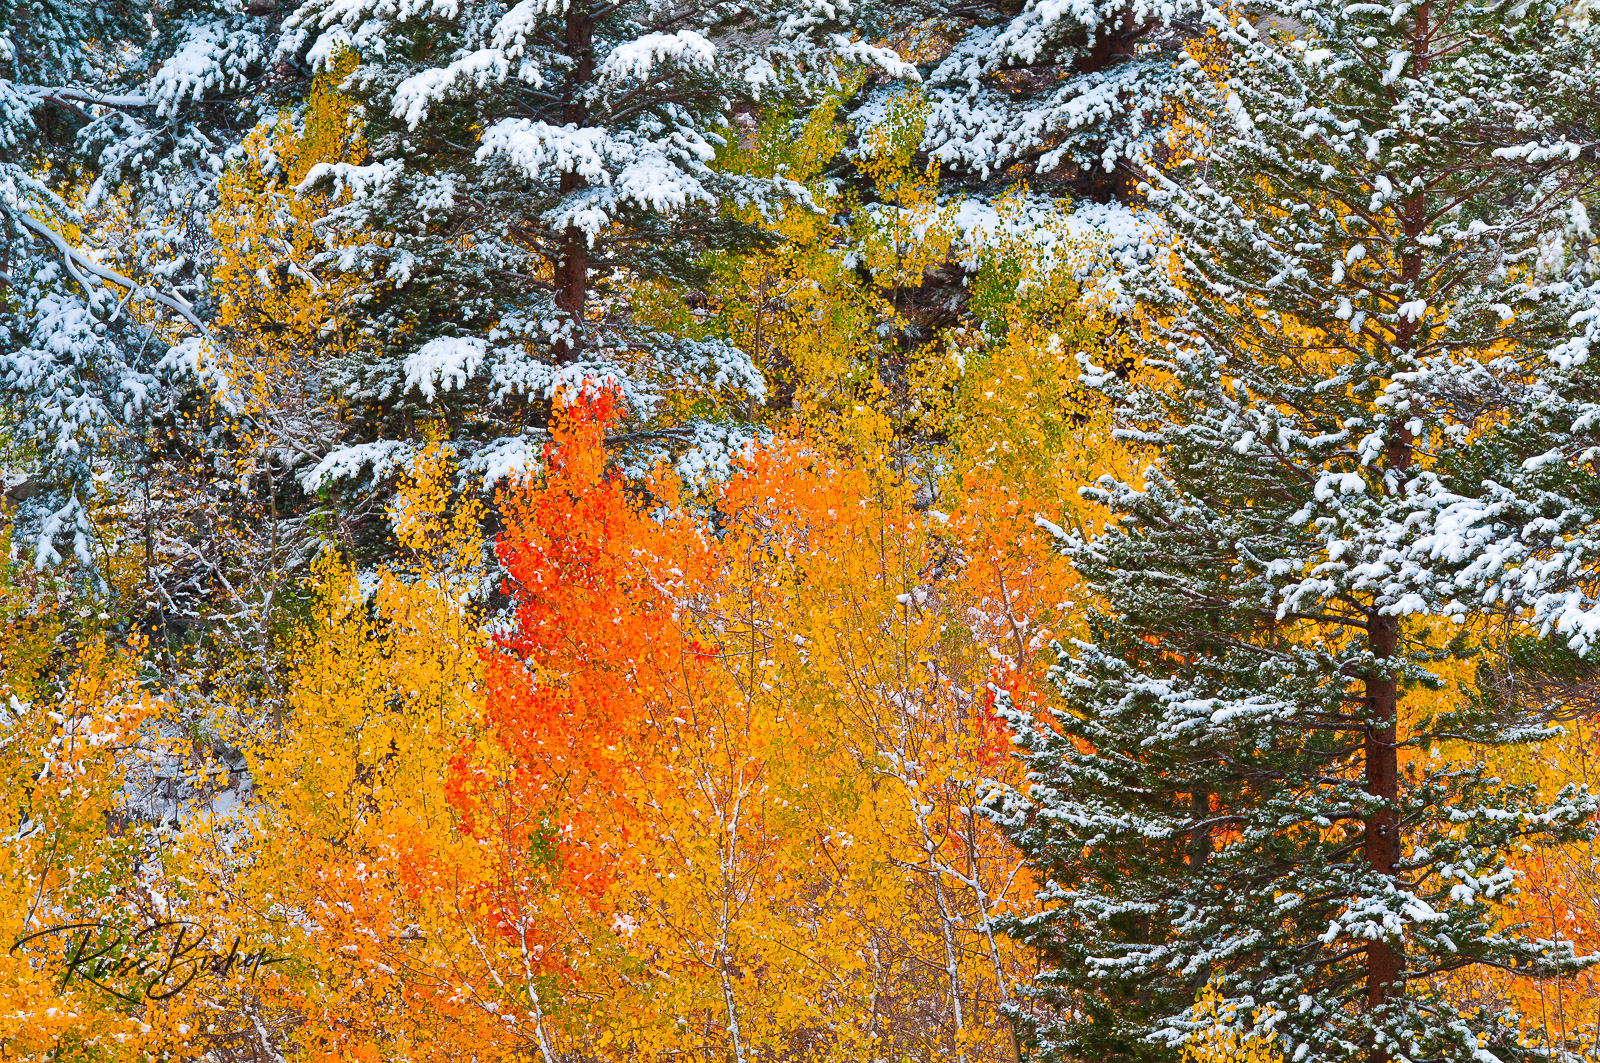 The Latent Image. Fresh snow on fall aspens and pines, Inyo National Forest, Sierra Nevada Mountains, California